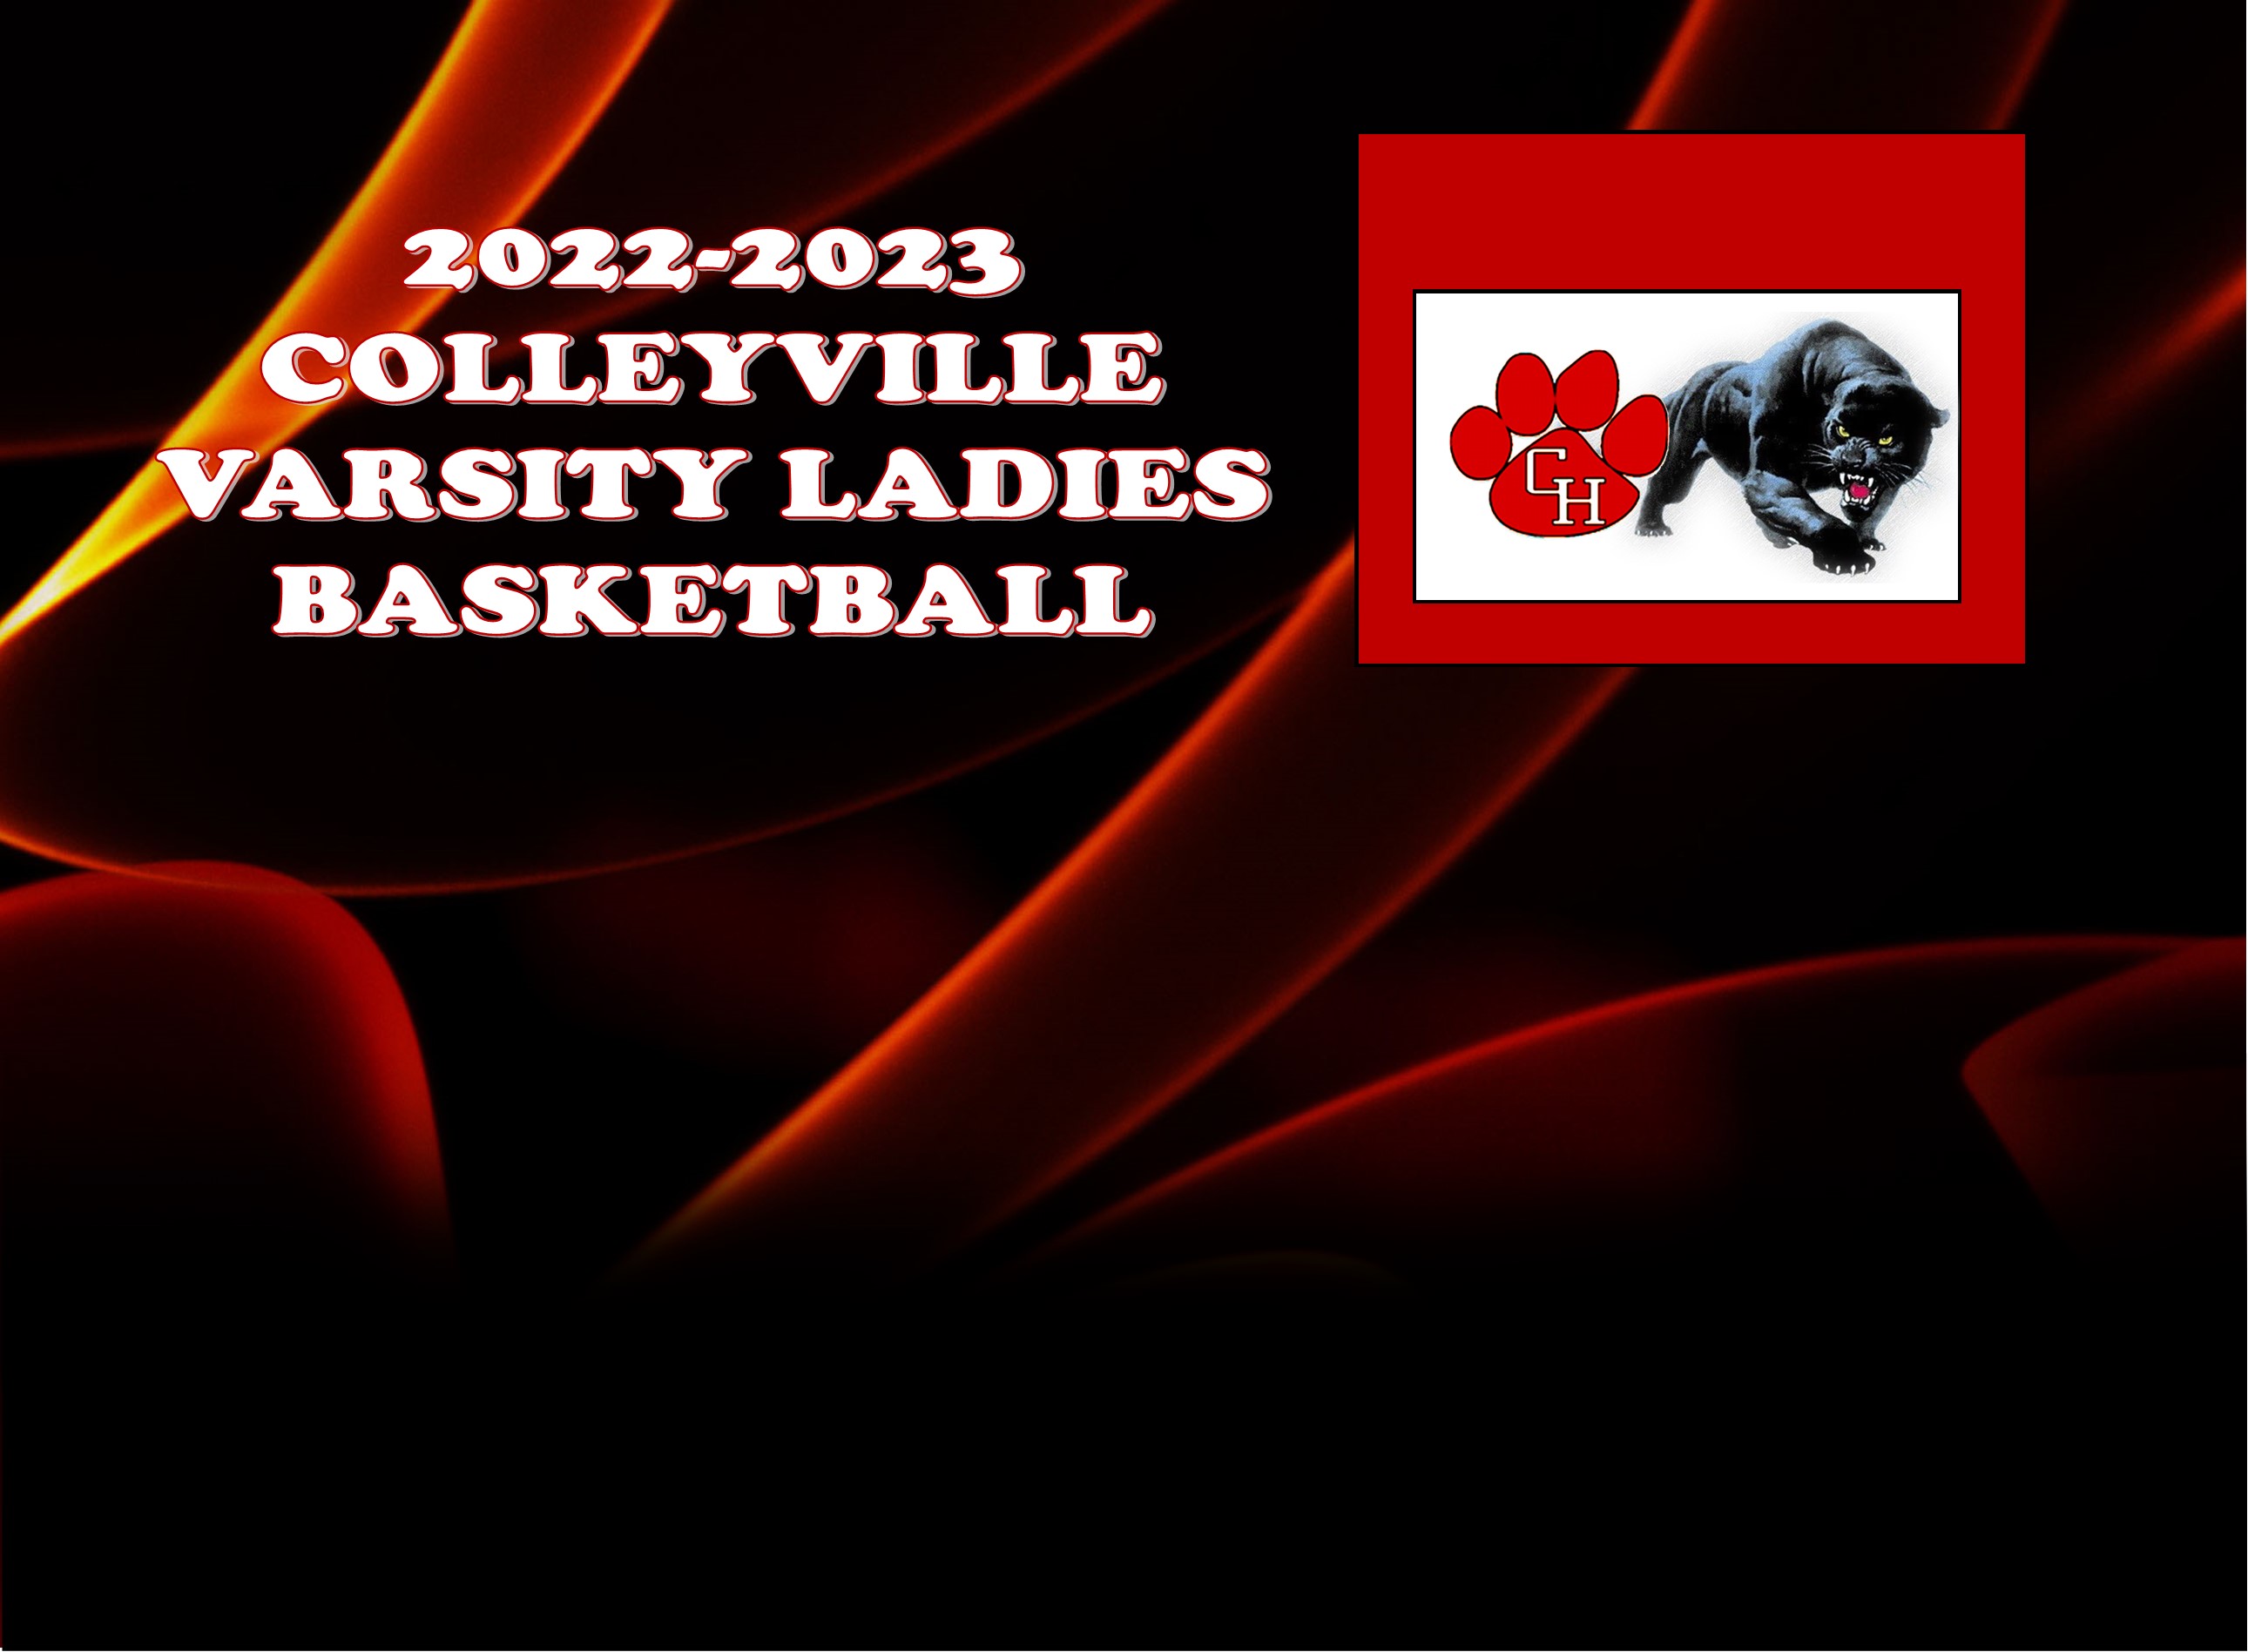 GCISD Varsity Basketball: Colleyville Lady Panthers Triumph Over Richland Lady Royals 53-32